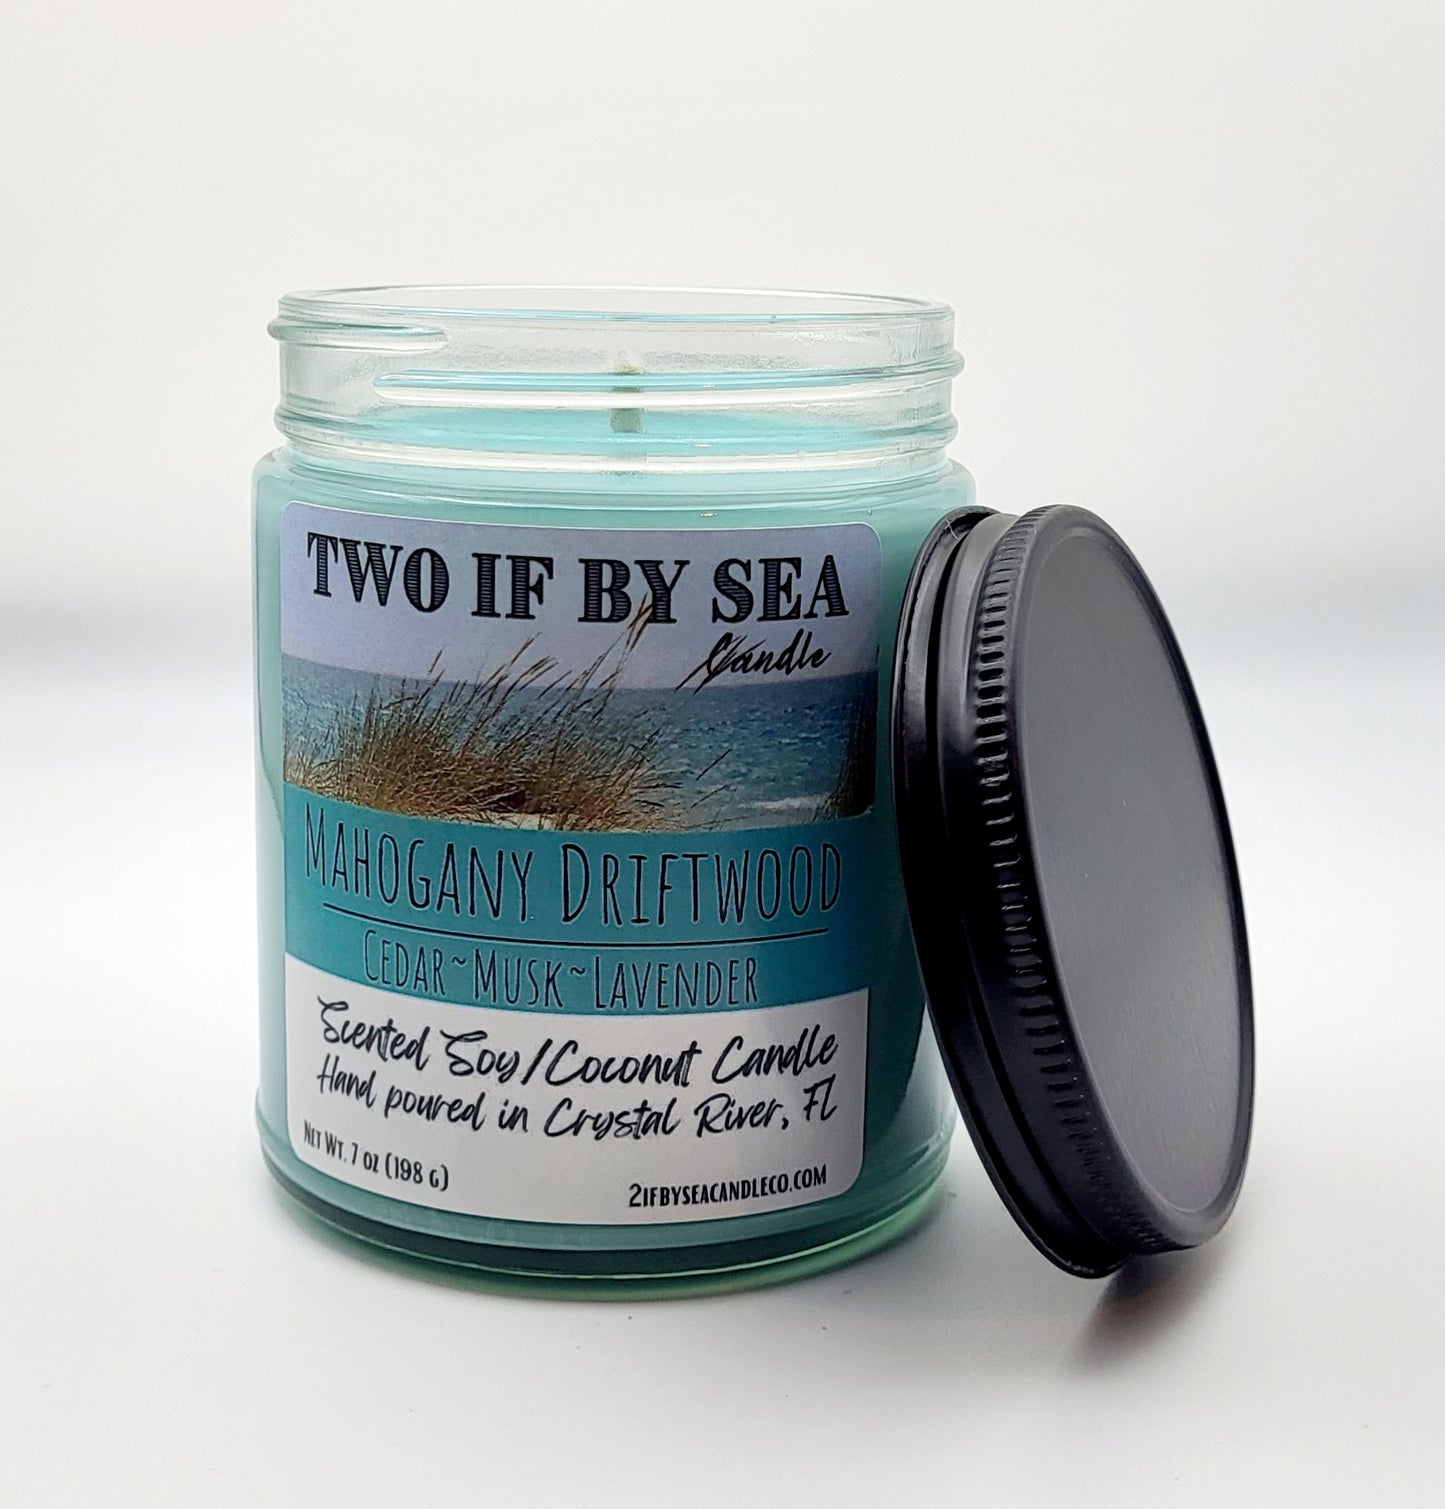 Mahogany Driftwood Scented Soy/Coconut Candle